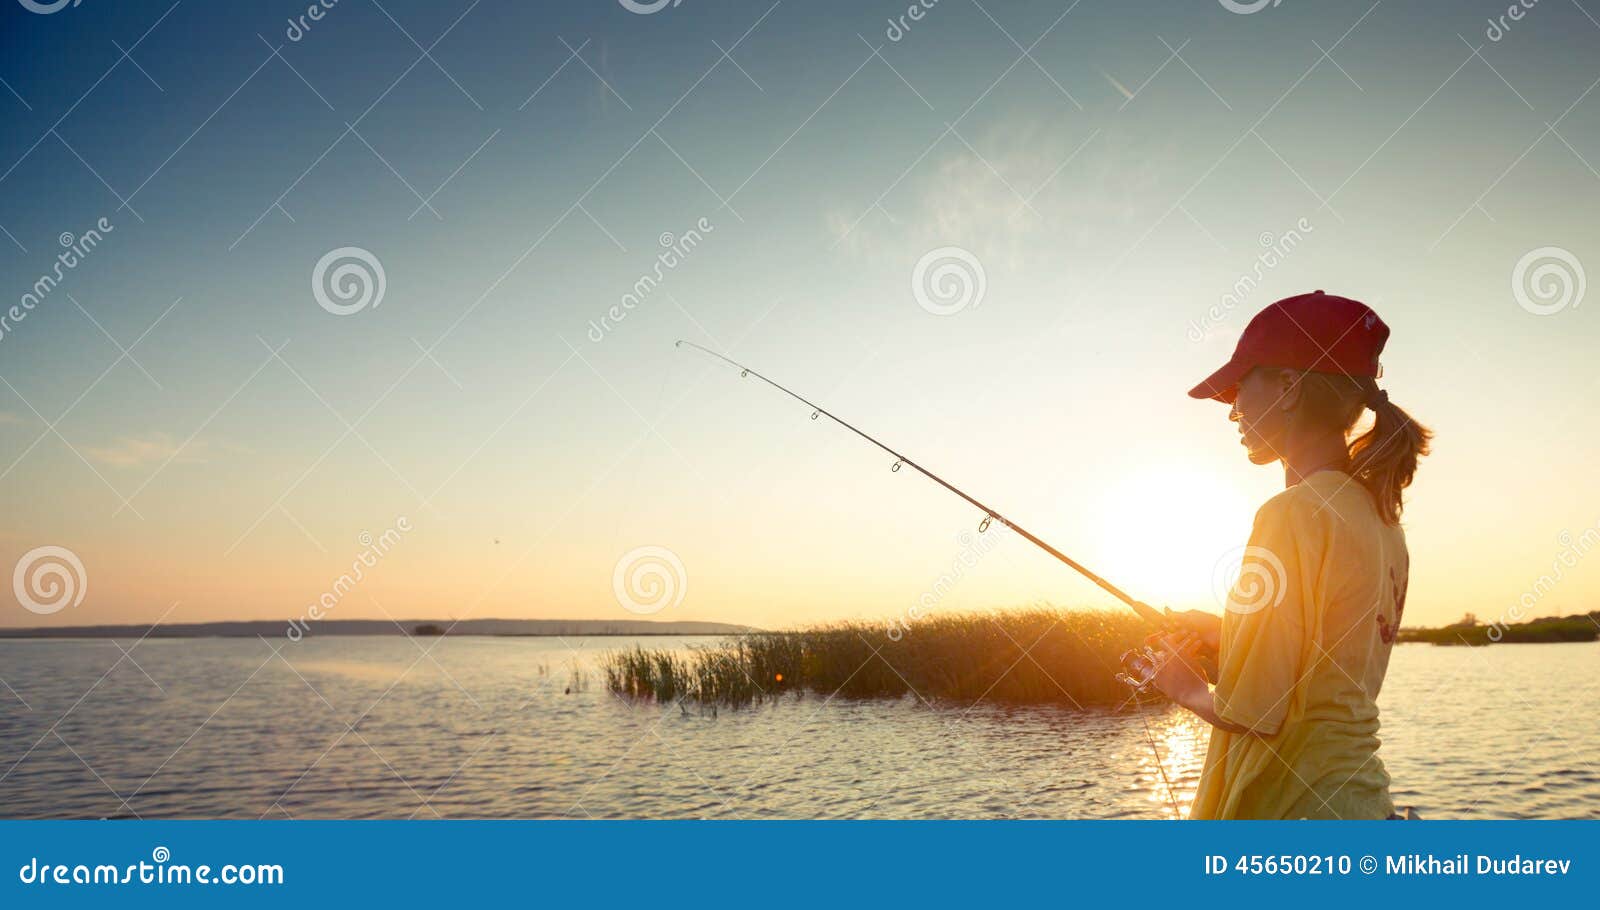 https://thumbs.dreamstime.com/z/fishing-young-lady-river-sunset-45650210.jpg